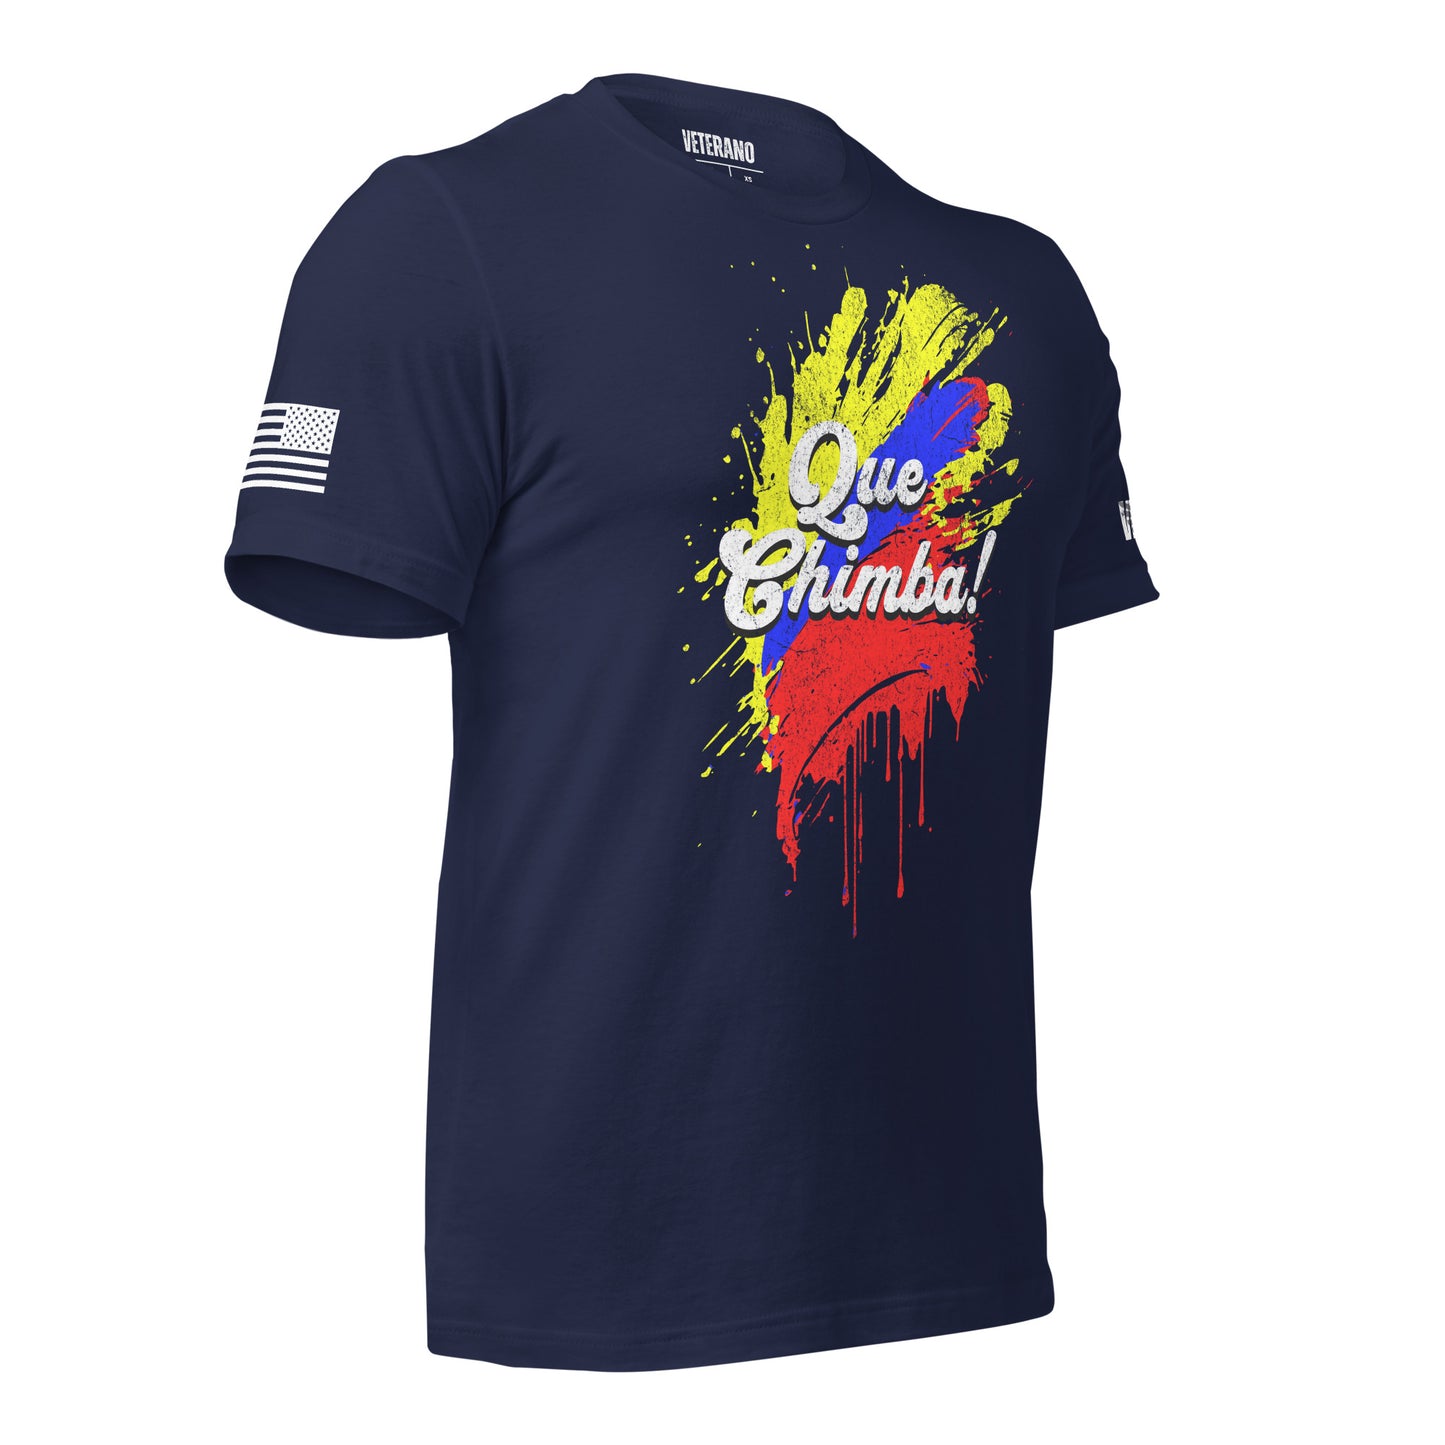 Que Chimba Colombia Tshirt